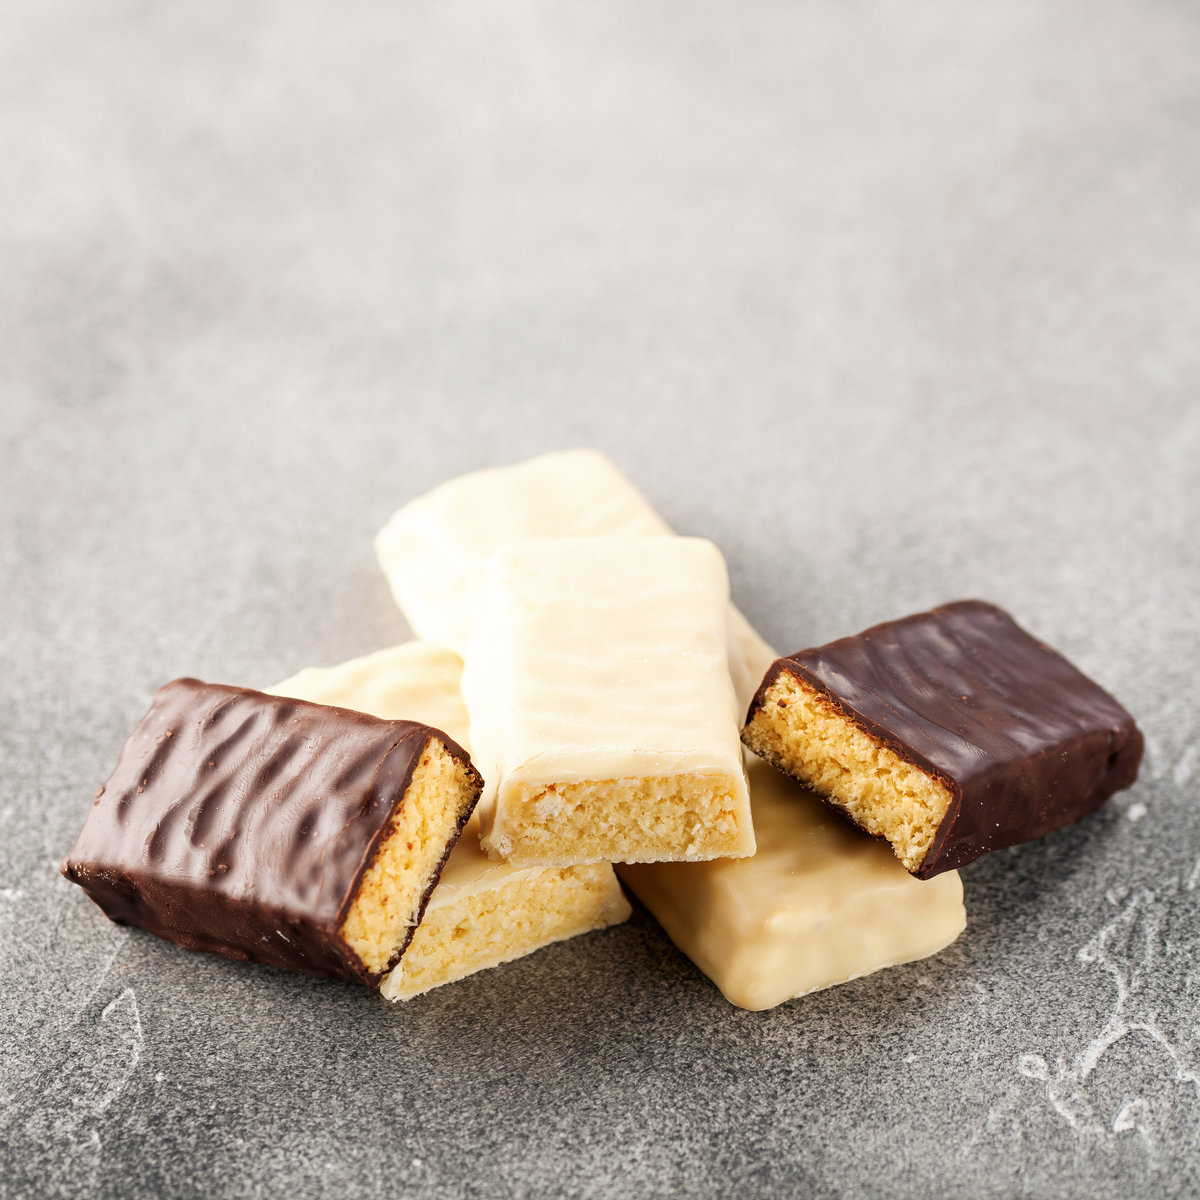 Stack of milk and white chocolate biscuits, cut in half, on a grey background